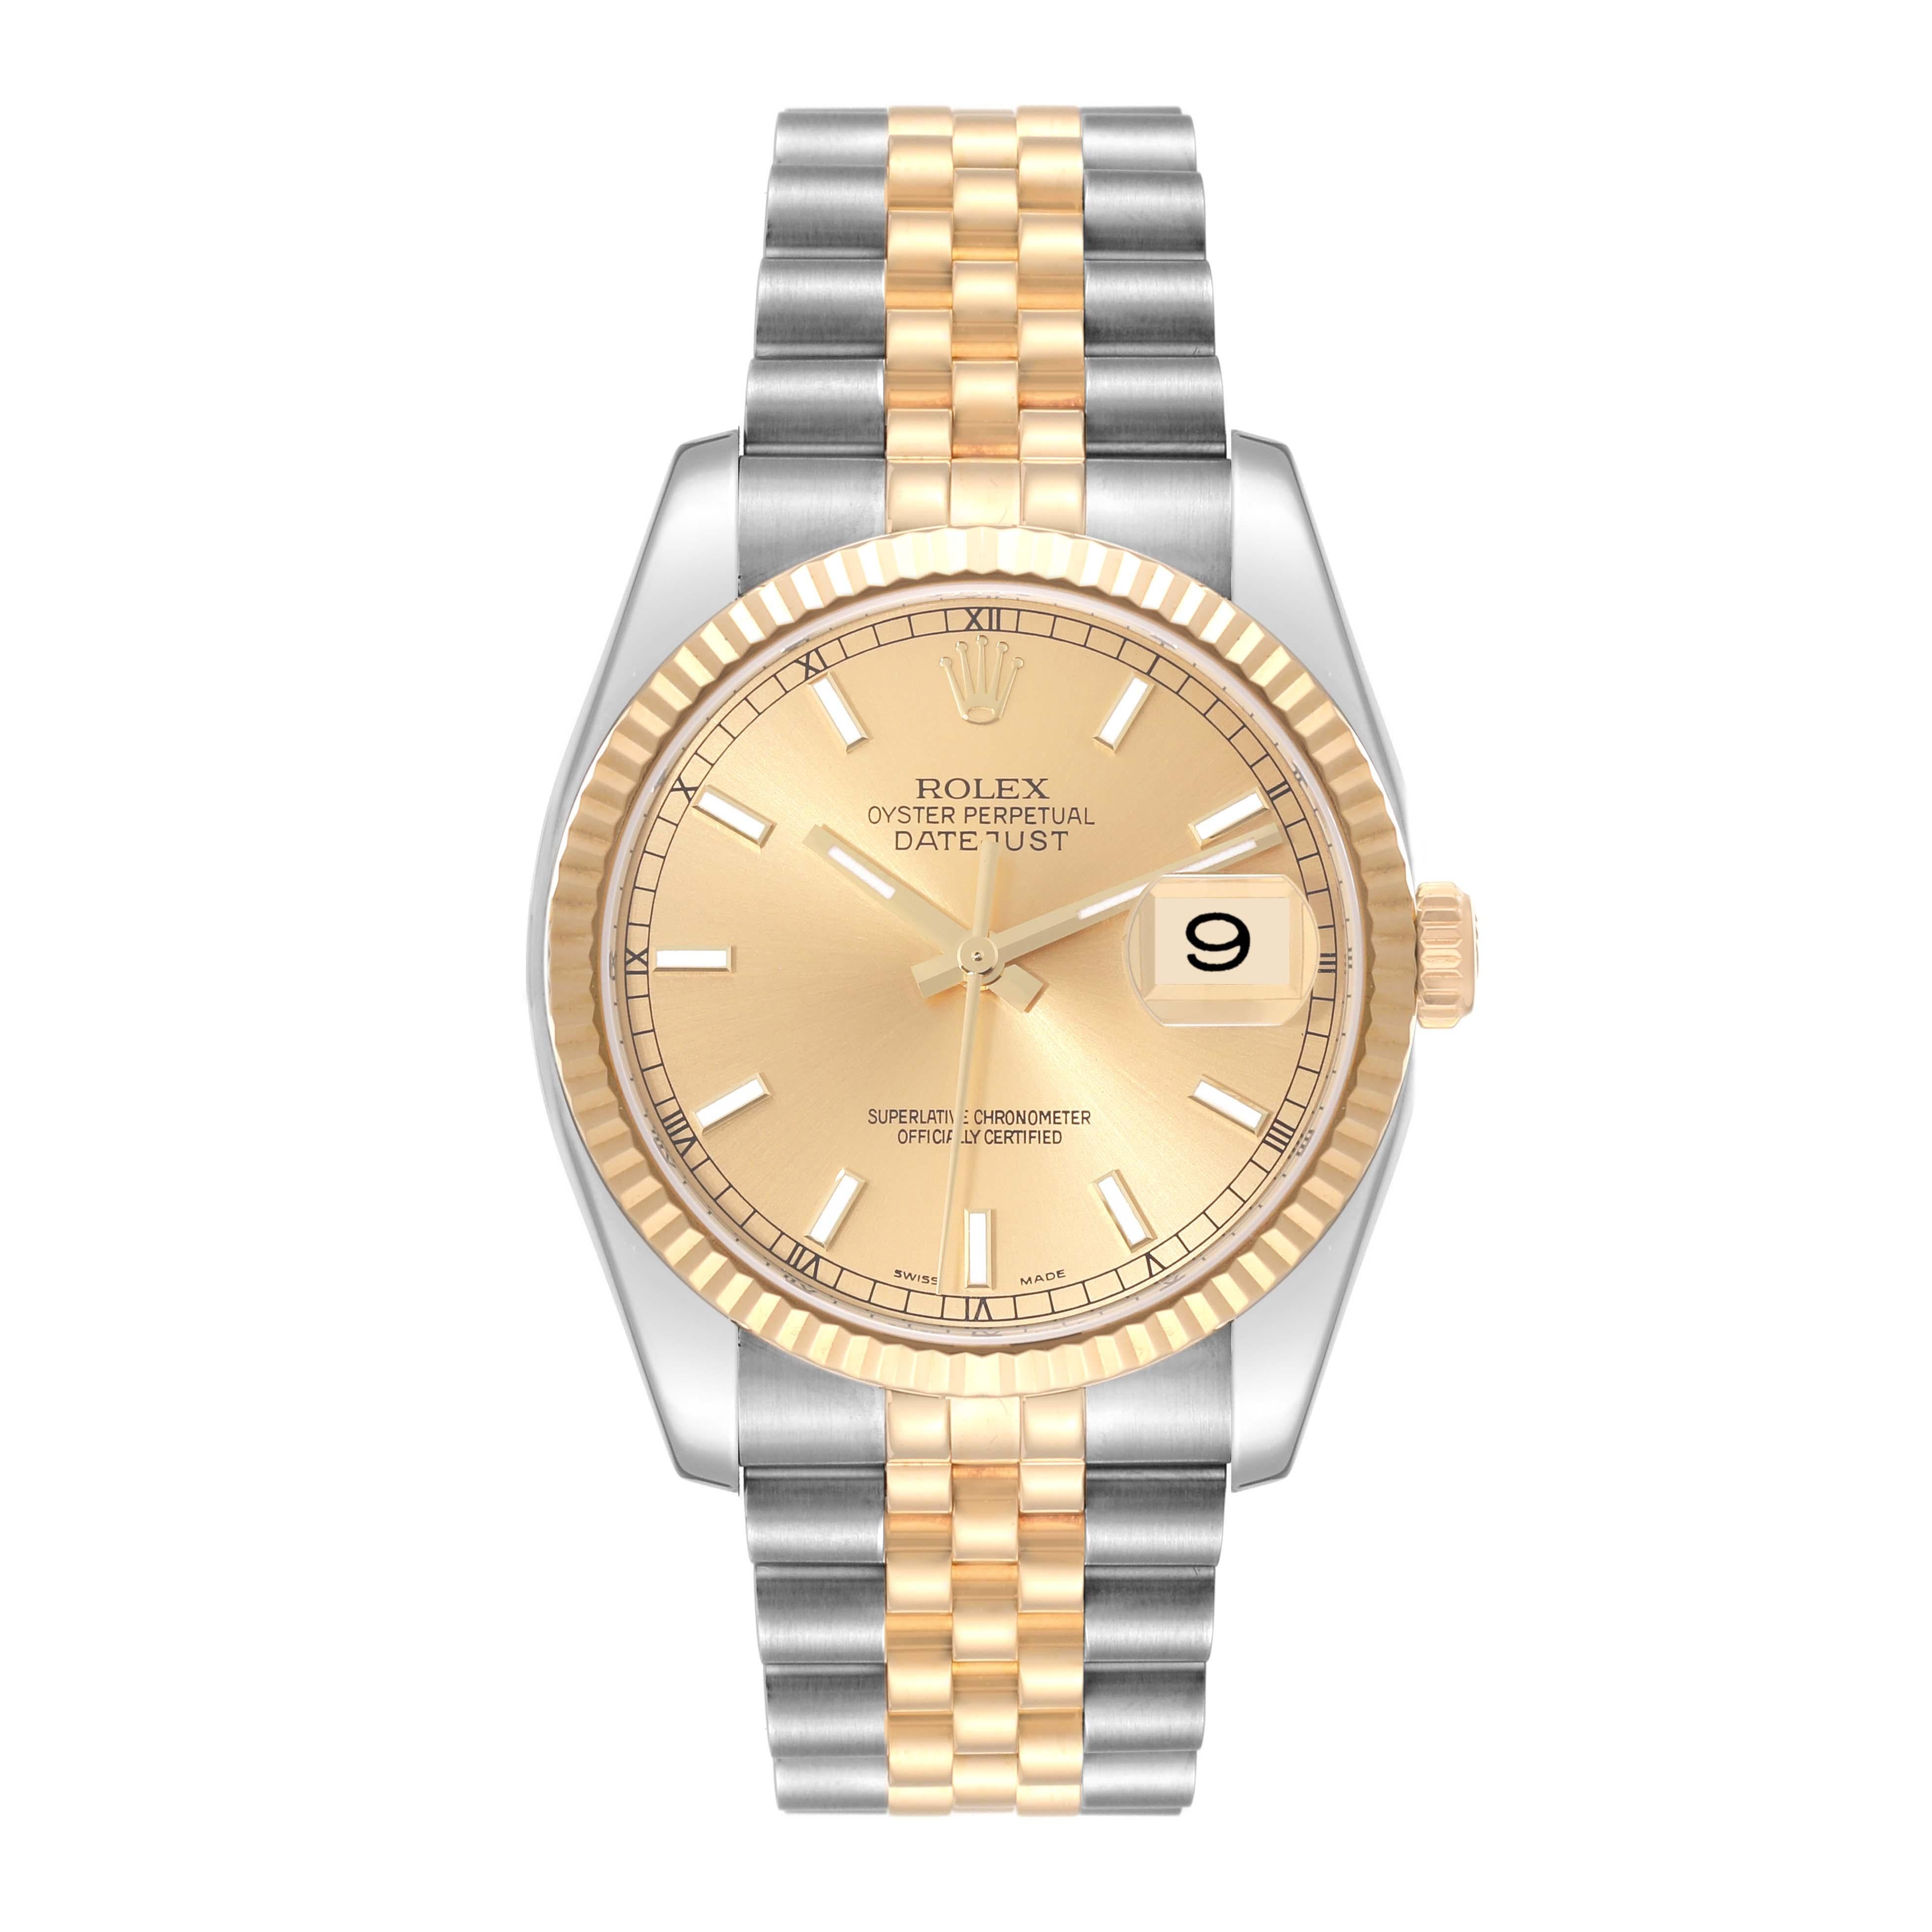 Rolex Datejust Steel Yellow Gold Champagne Dial Mens Watch 116233 Box Papers. Officially certified chronometer automatic self-winding movement. Stainless steel case 36 mm in diameter. Rolex logo on an 18k yellow gold crown. 18k yellow gold fluted